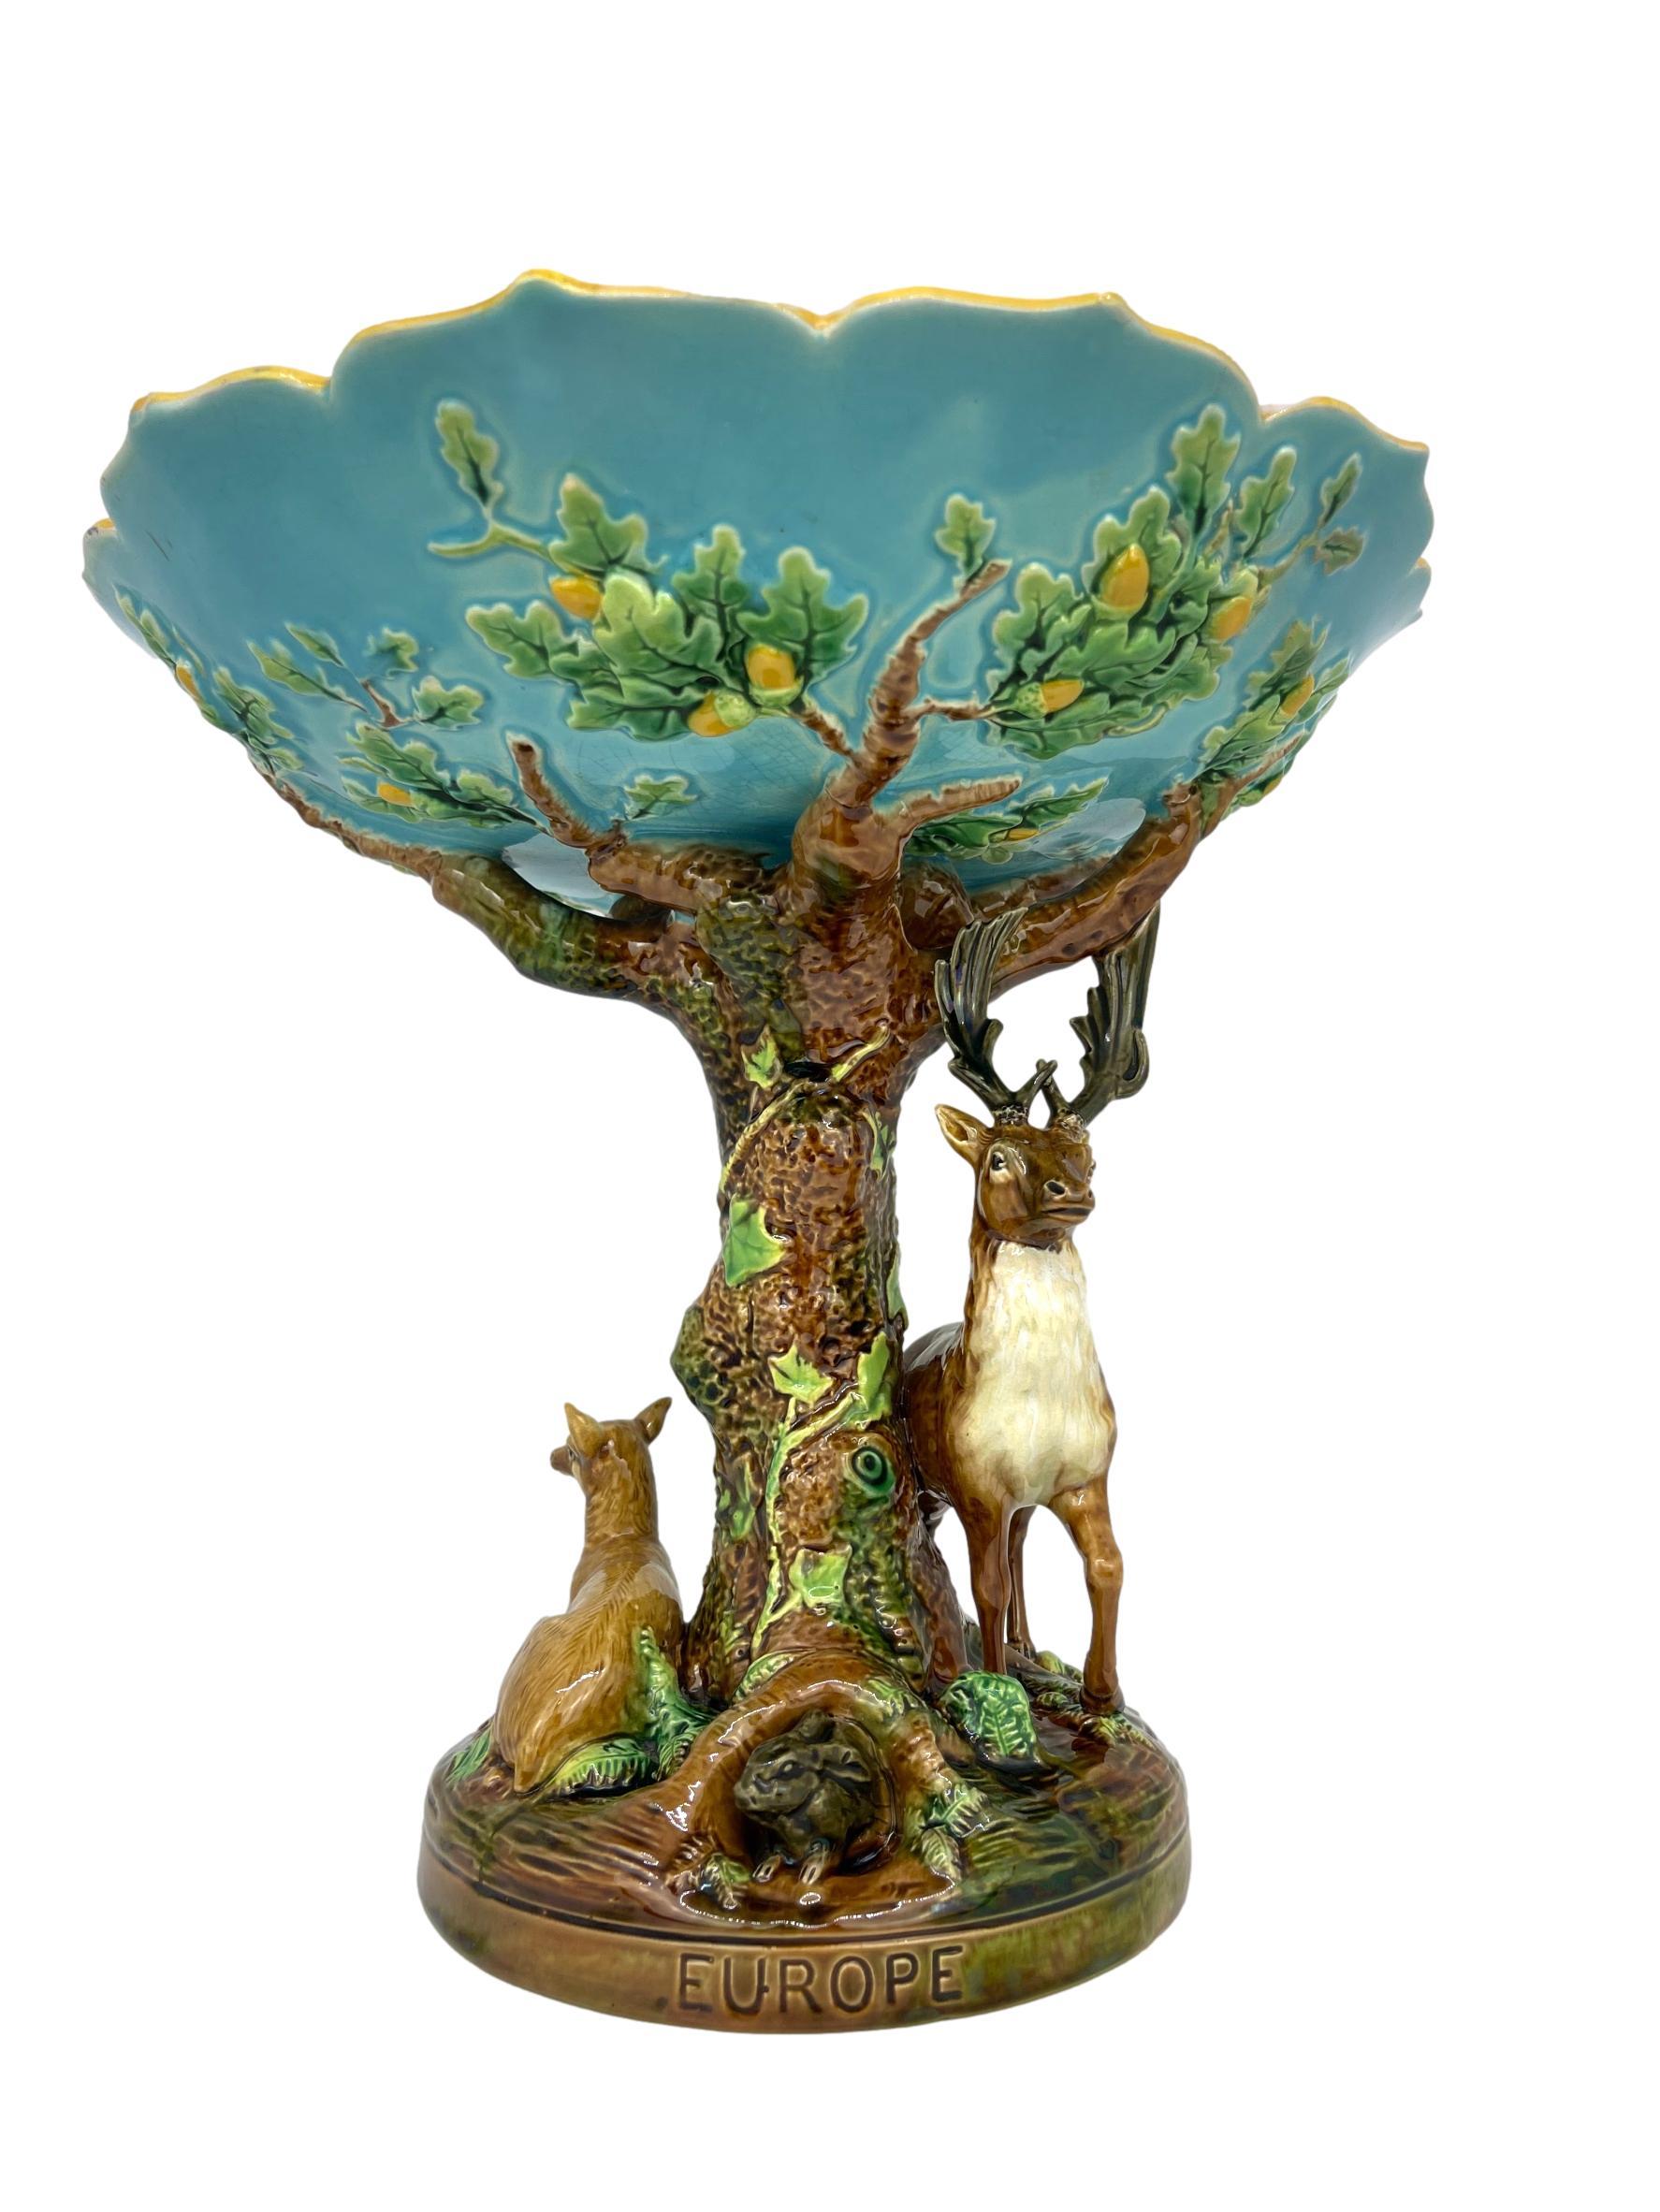 George Jones Majolica 'EUROPE' centerpiece, English, 1872 
The shaped bowl supported by an oak tree, with a standing stag, reclining doe, and a rabbit, the bottom band impressed, 'EUROPE,' the reverse with British Registry lozenge for 23 December